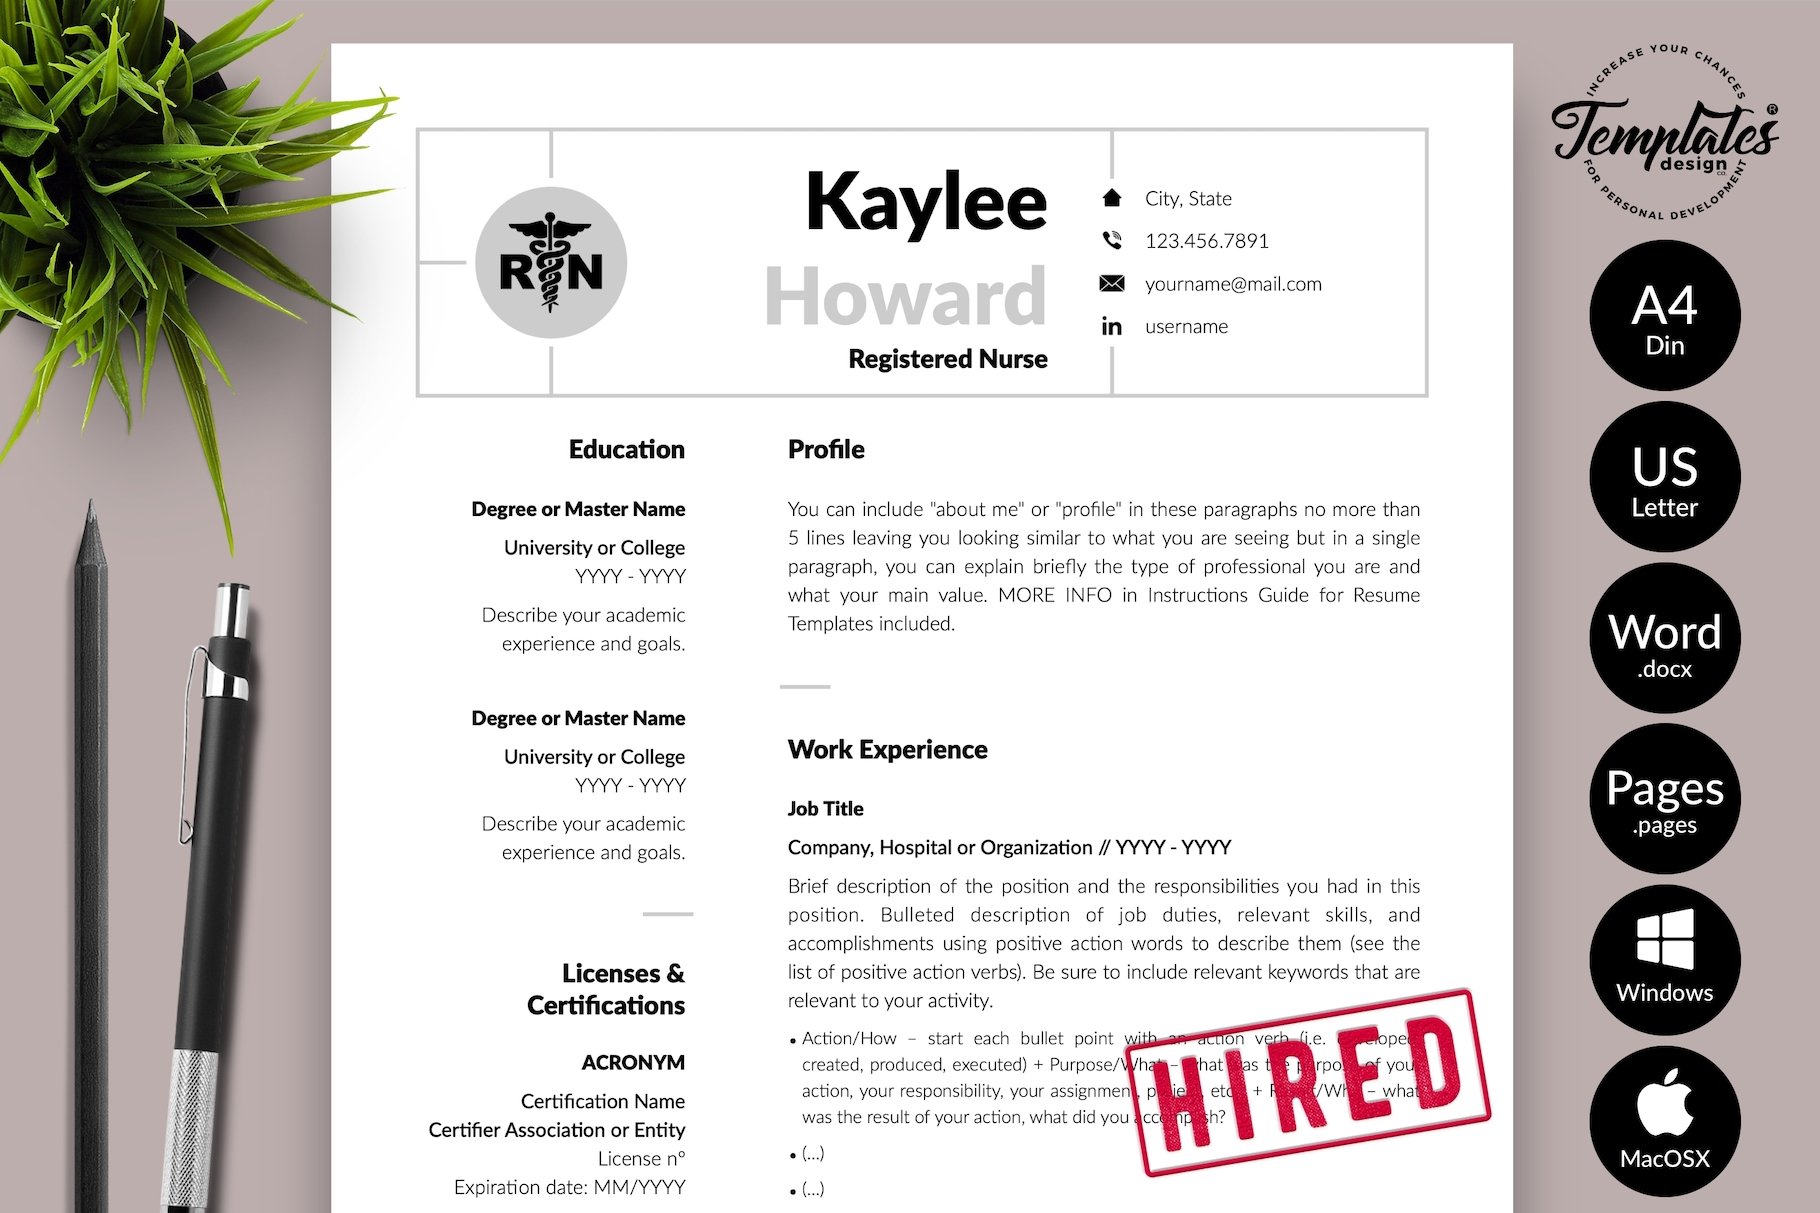 Resume with a stamp on it next to a pen and a plant.